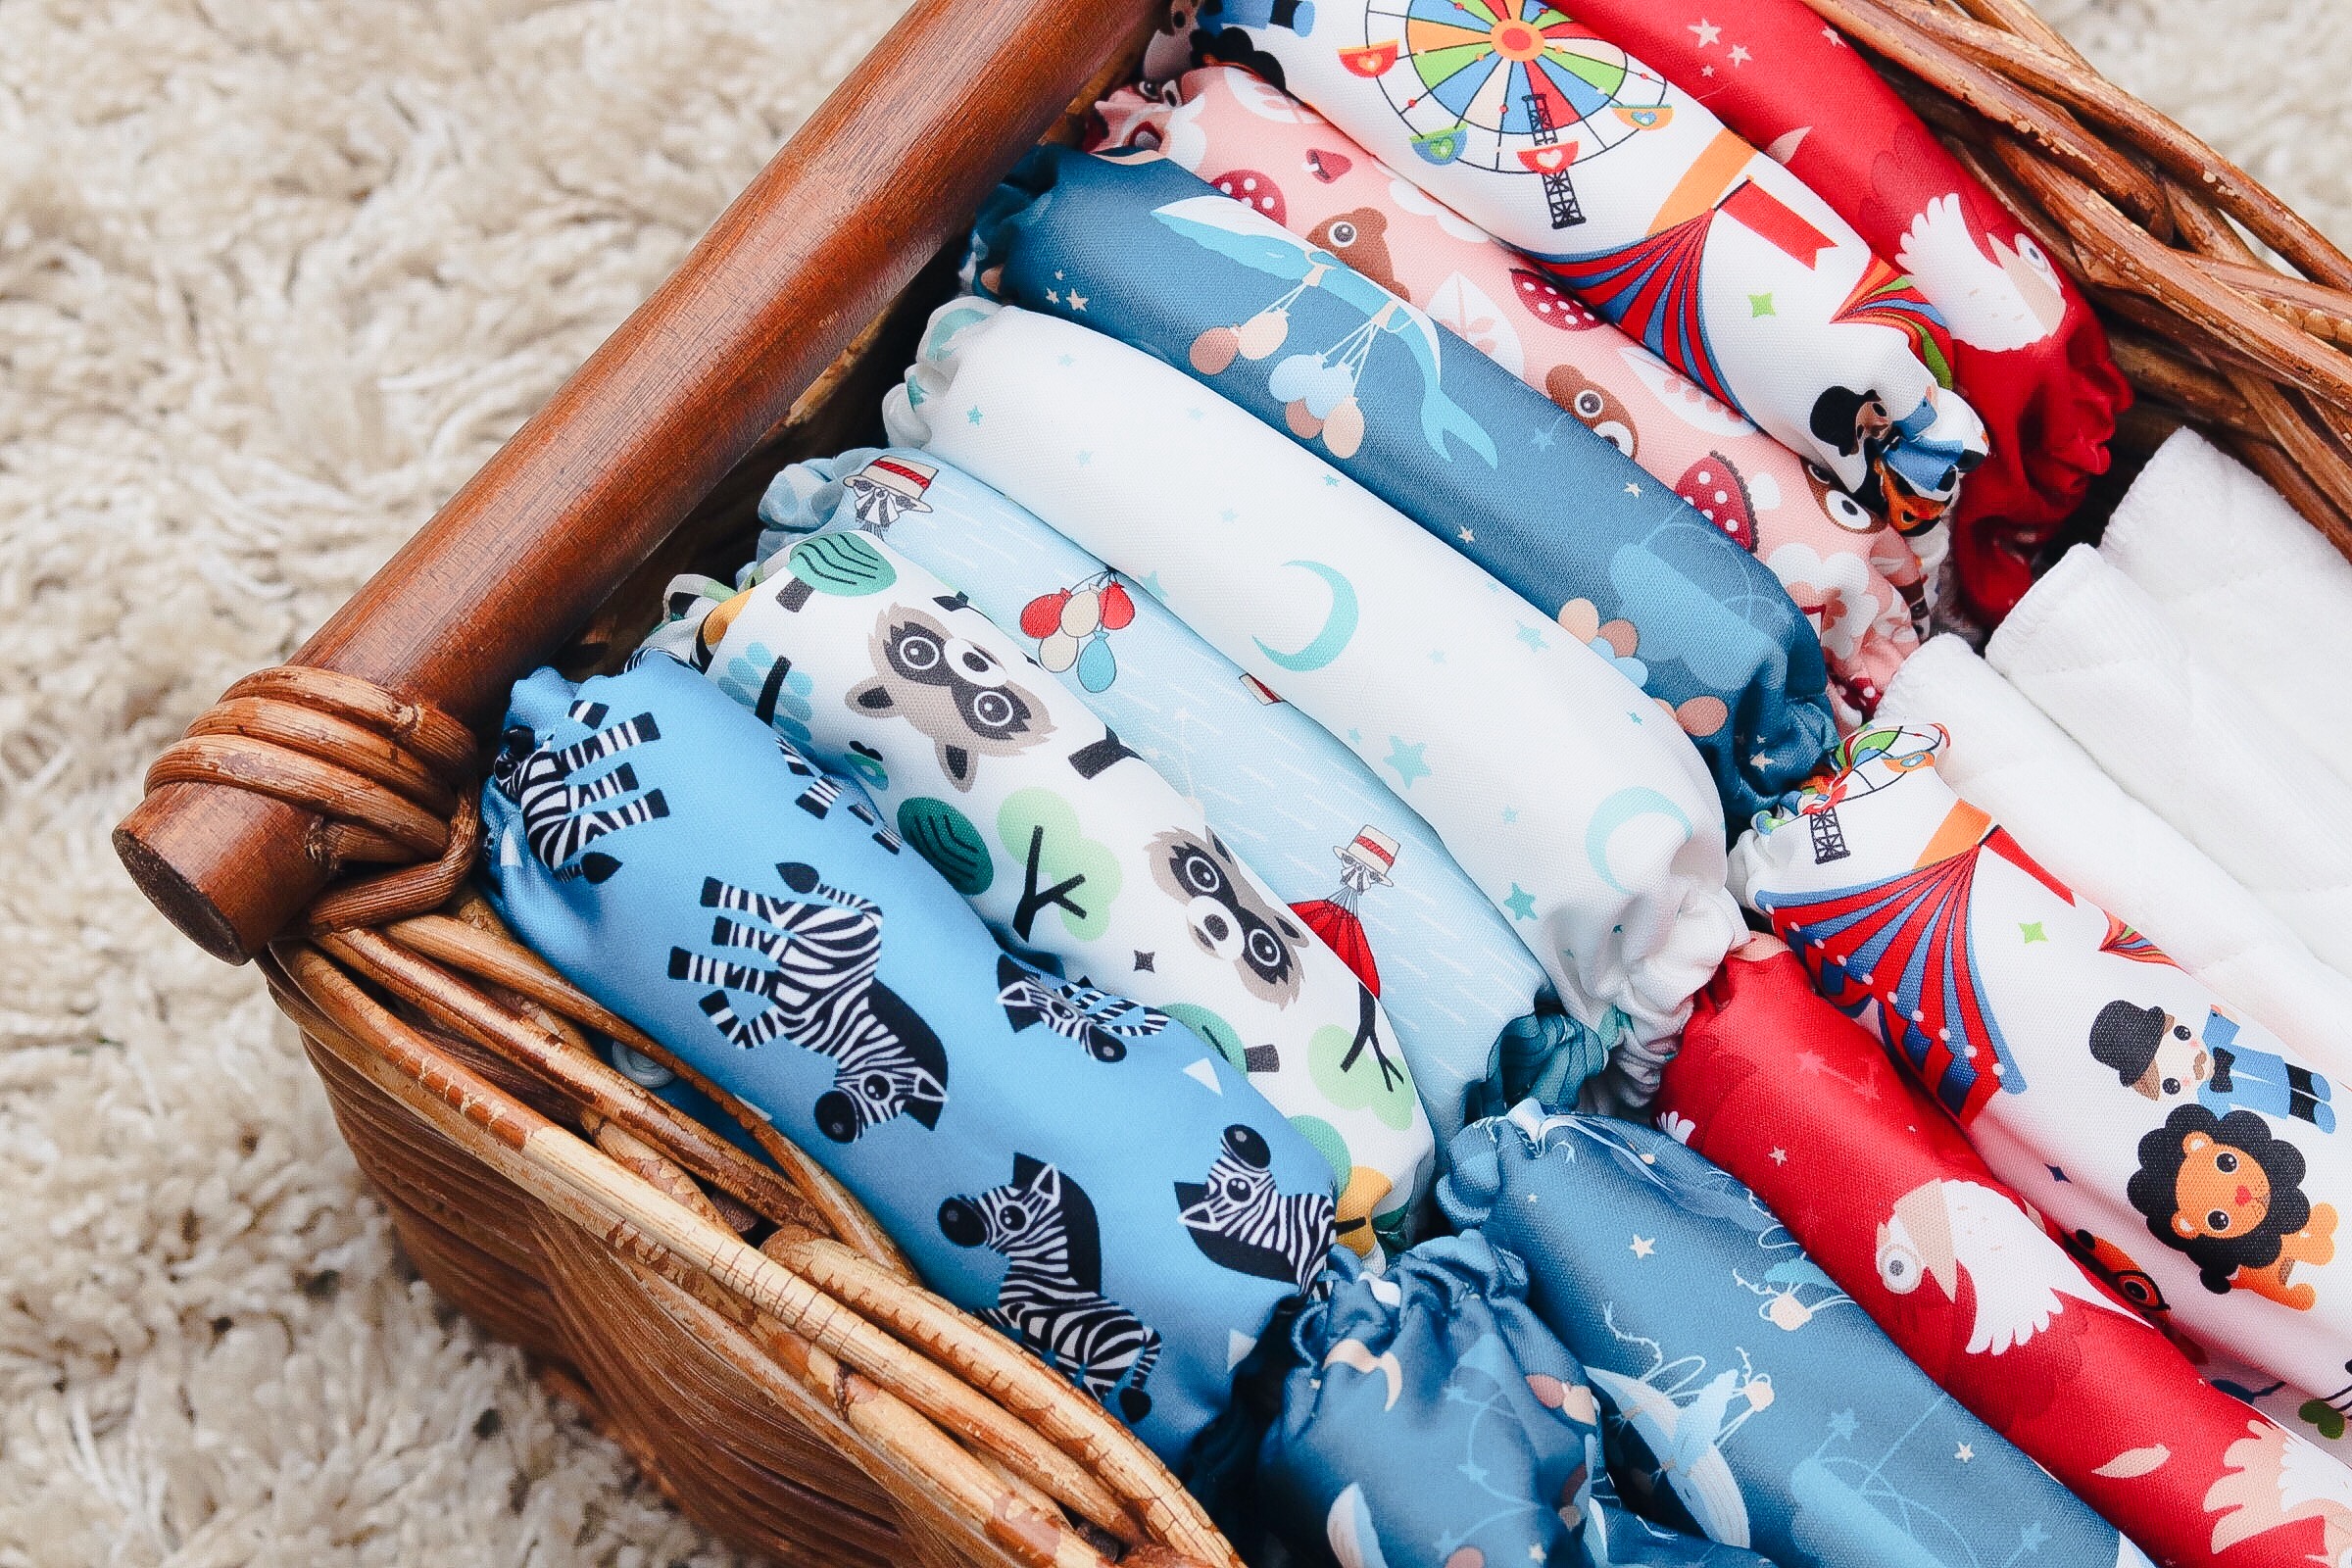 Cloth Nappies in basket